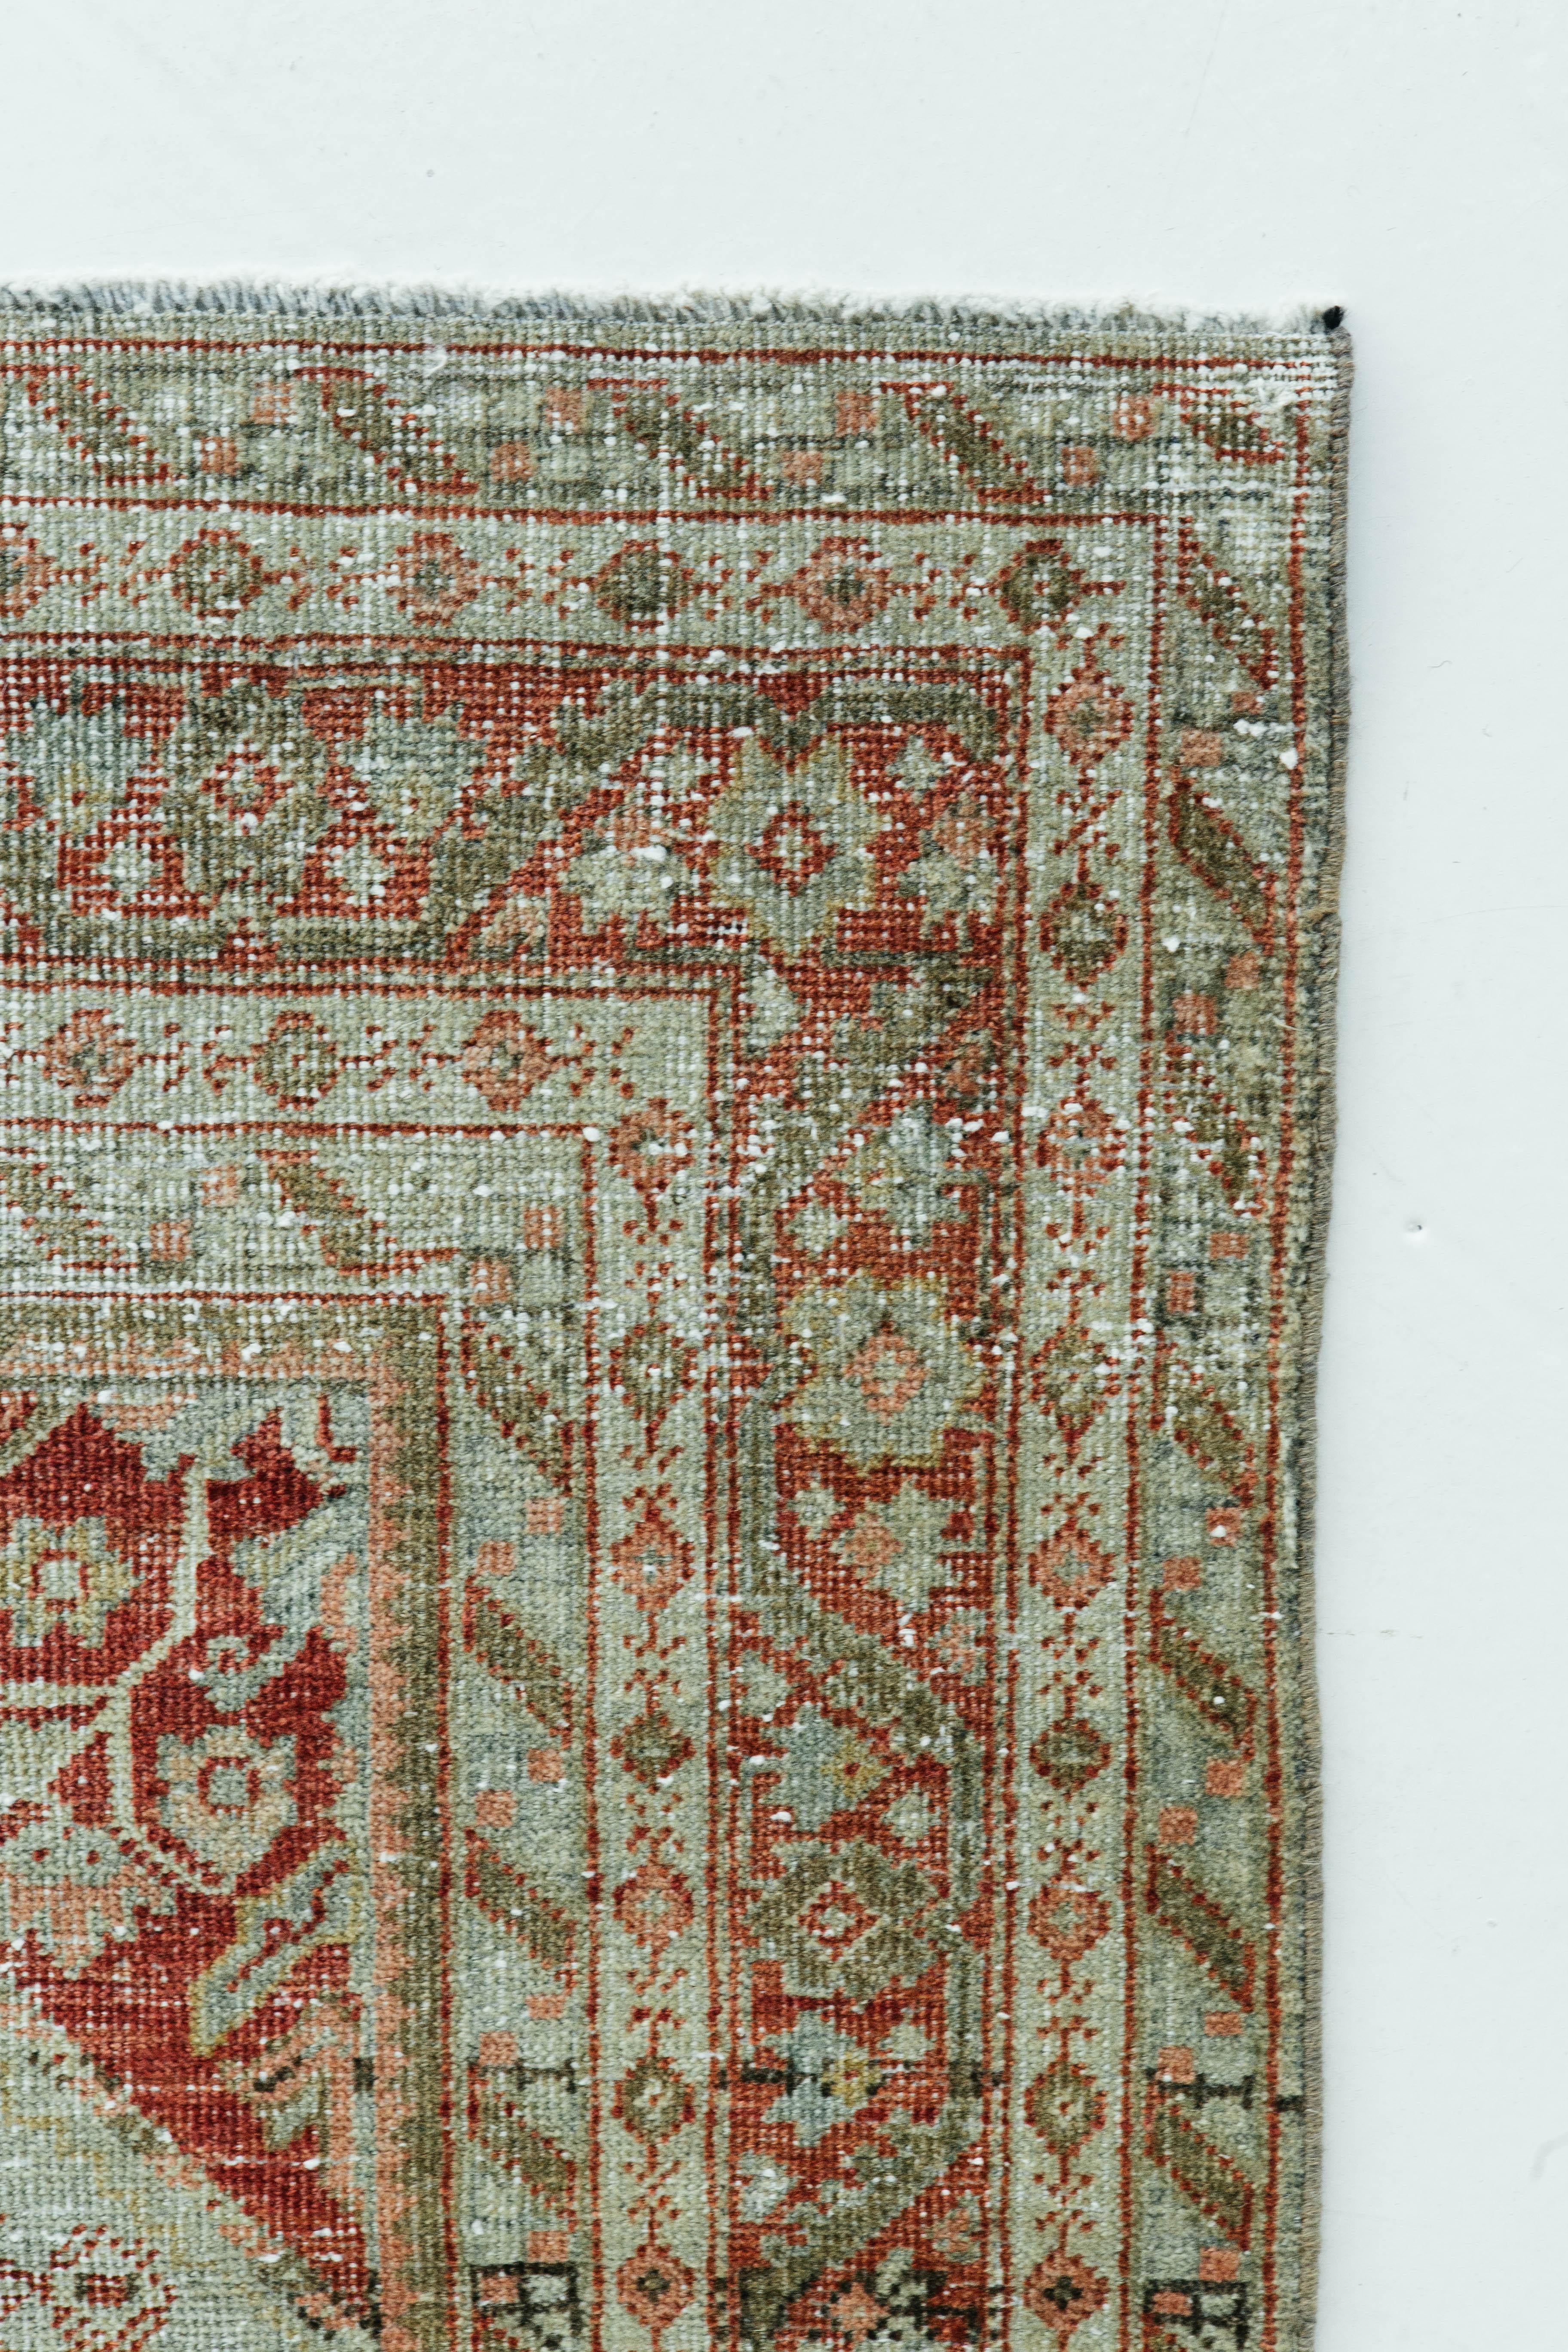 This antique Persian Mahal is both sophisticated and highly decorative. The rug's cohesive colors as well as geometric floral patterning is versatile and can be incorporated in almost any setting. Mahal rugs have strong aesthetic appeal and are